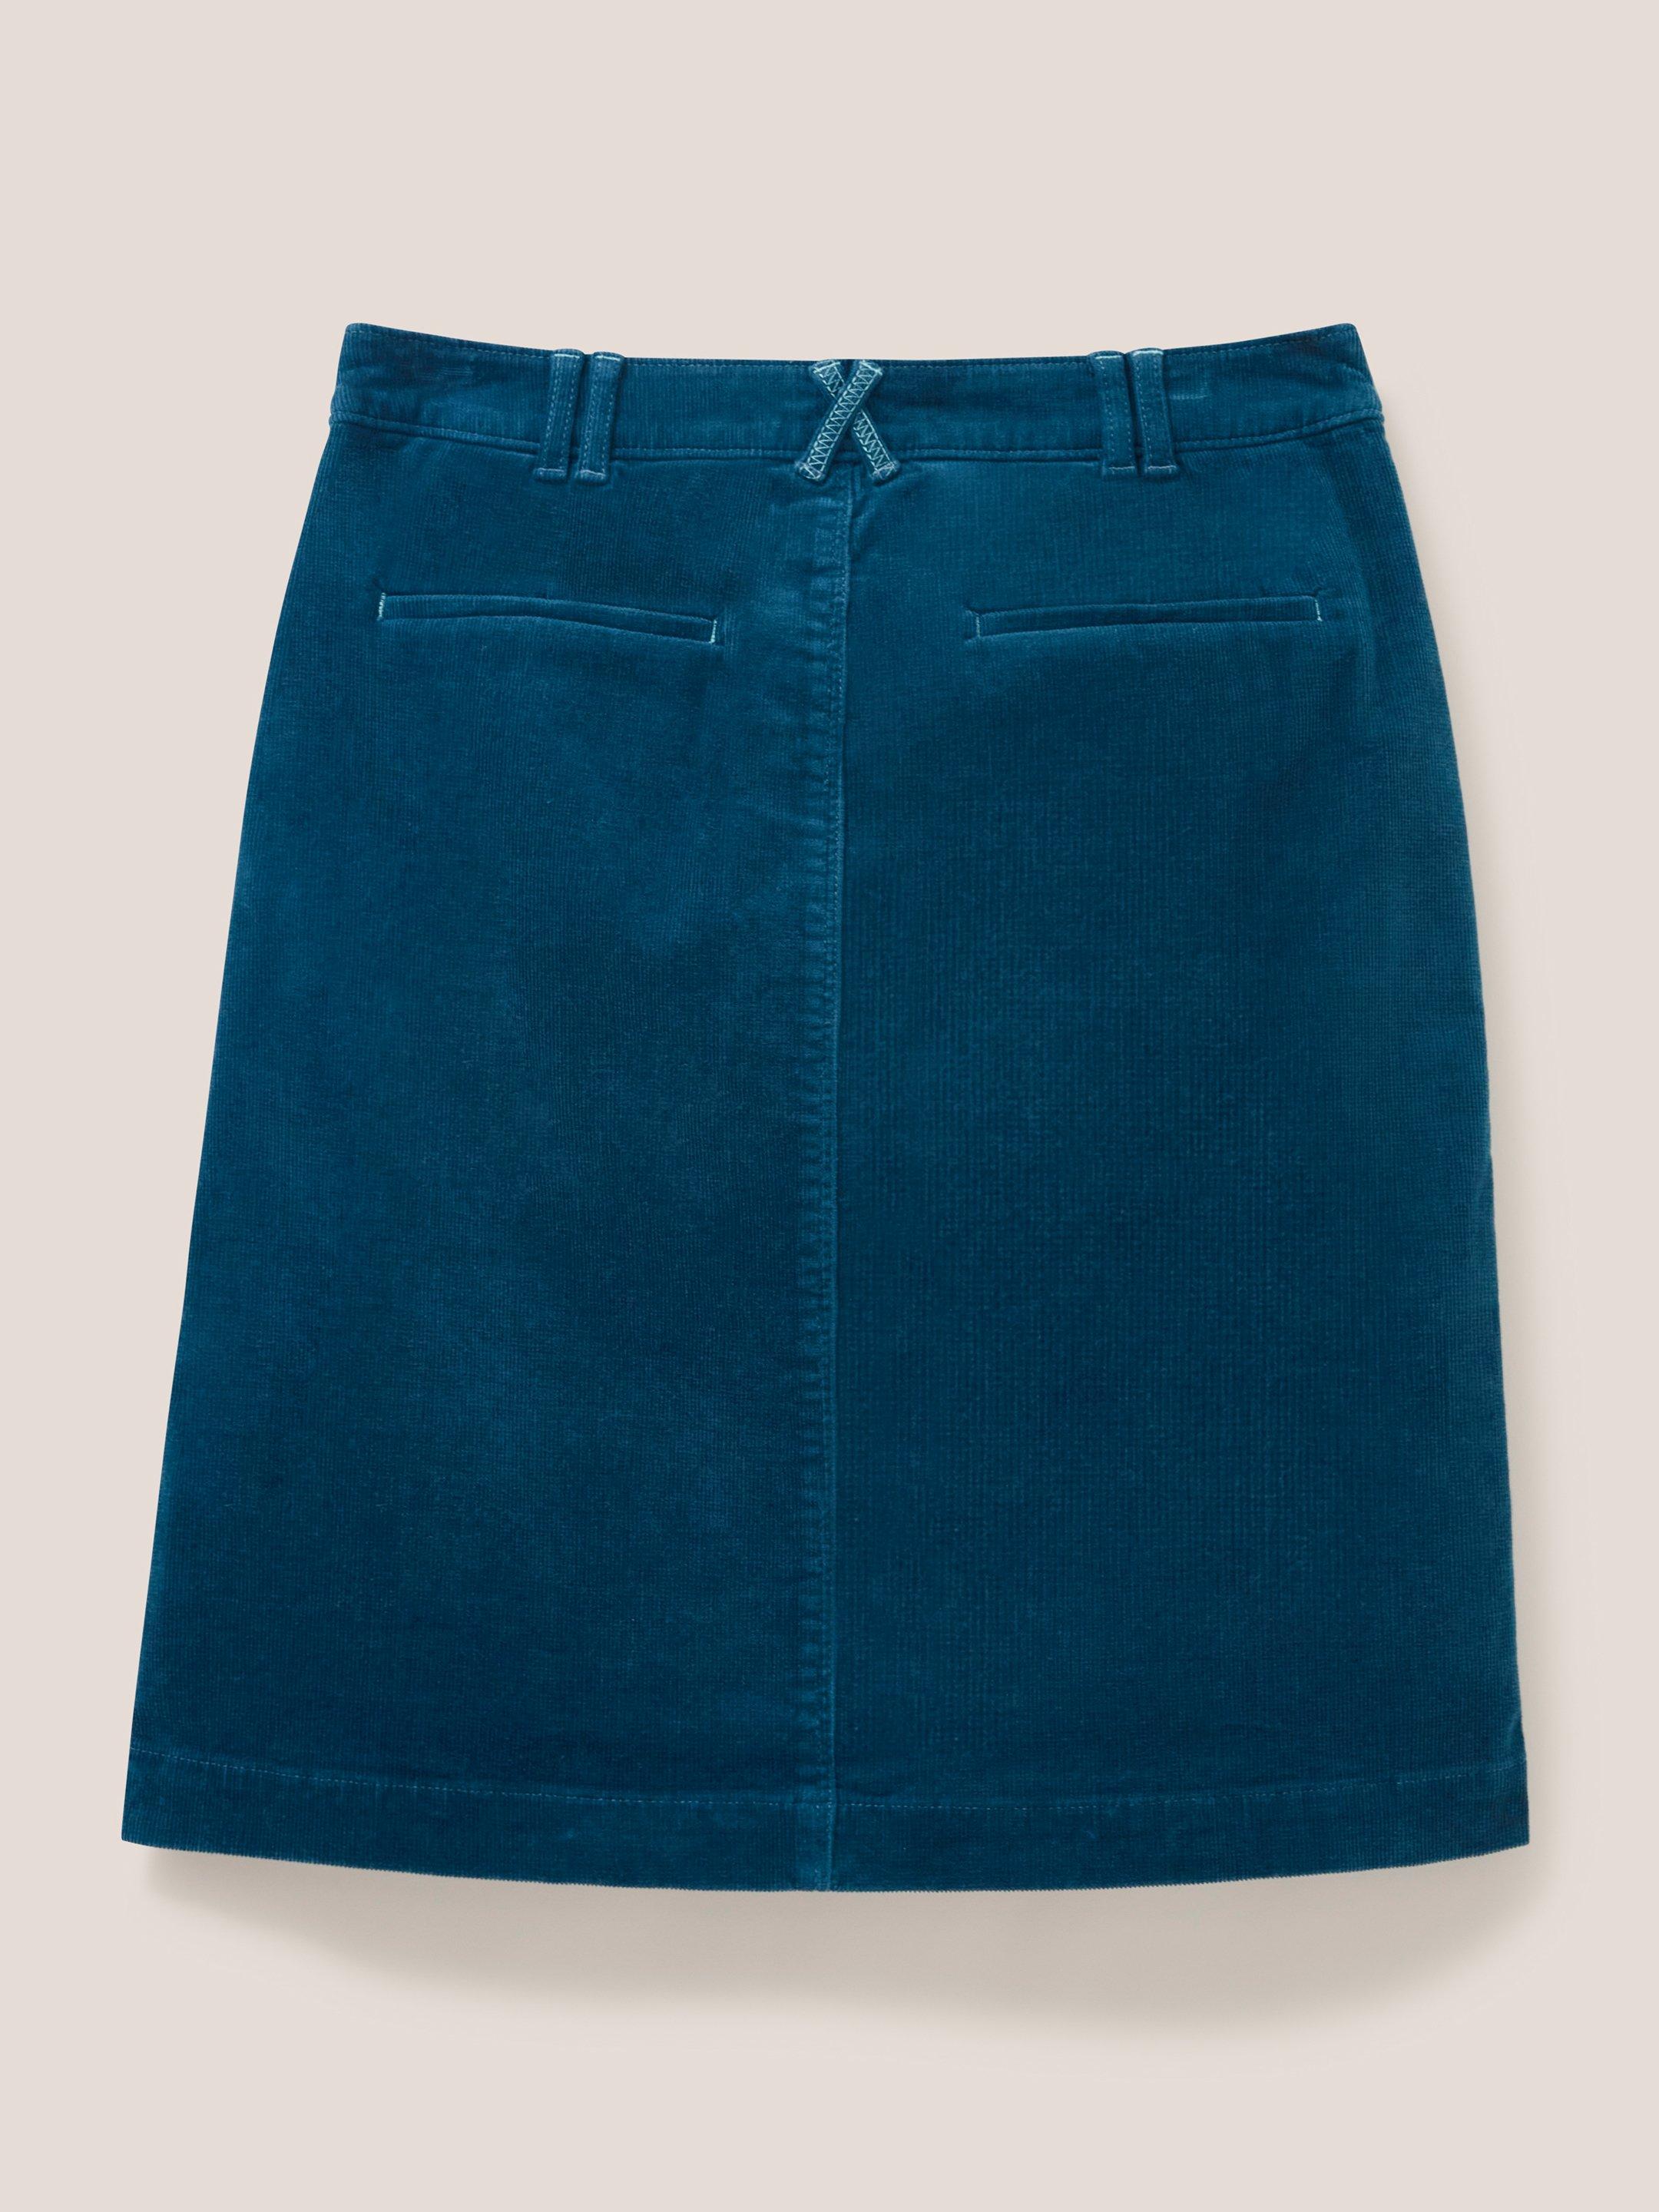 Melody Organic Cord Skirt in DK TEAL | White Stuff